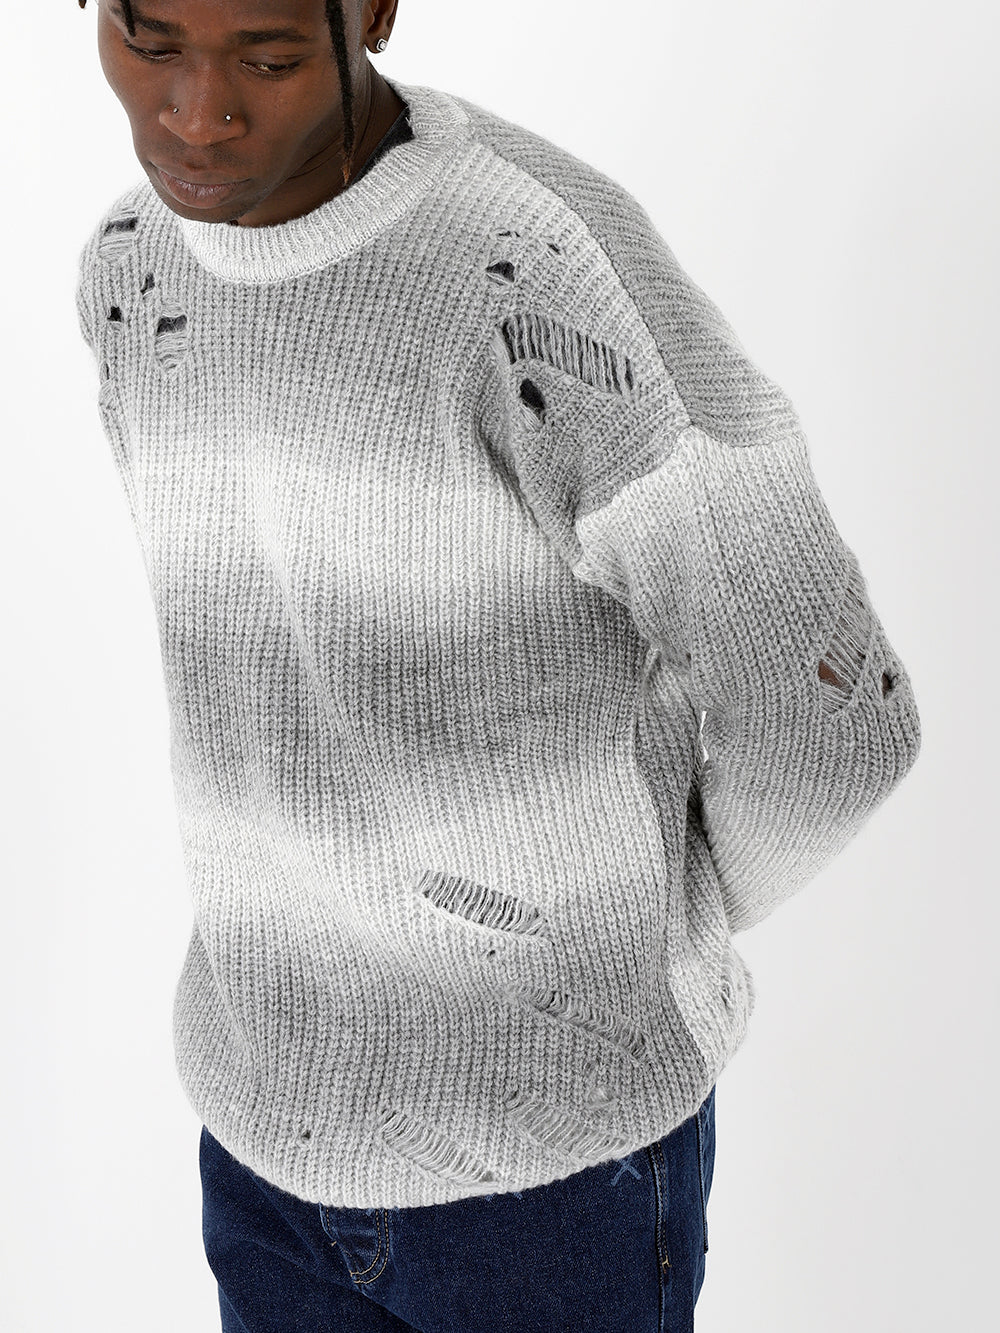 A man wearing a DISTRESSED GENTLEMAN SWEATER | WHITE-GRAY sweater.